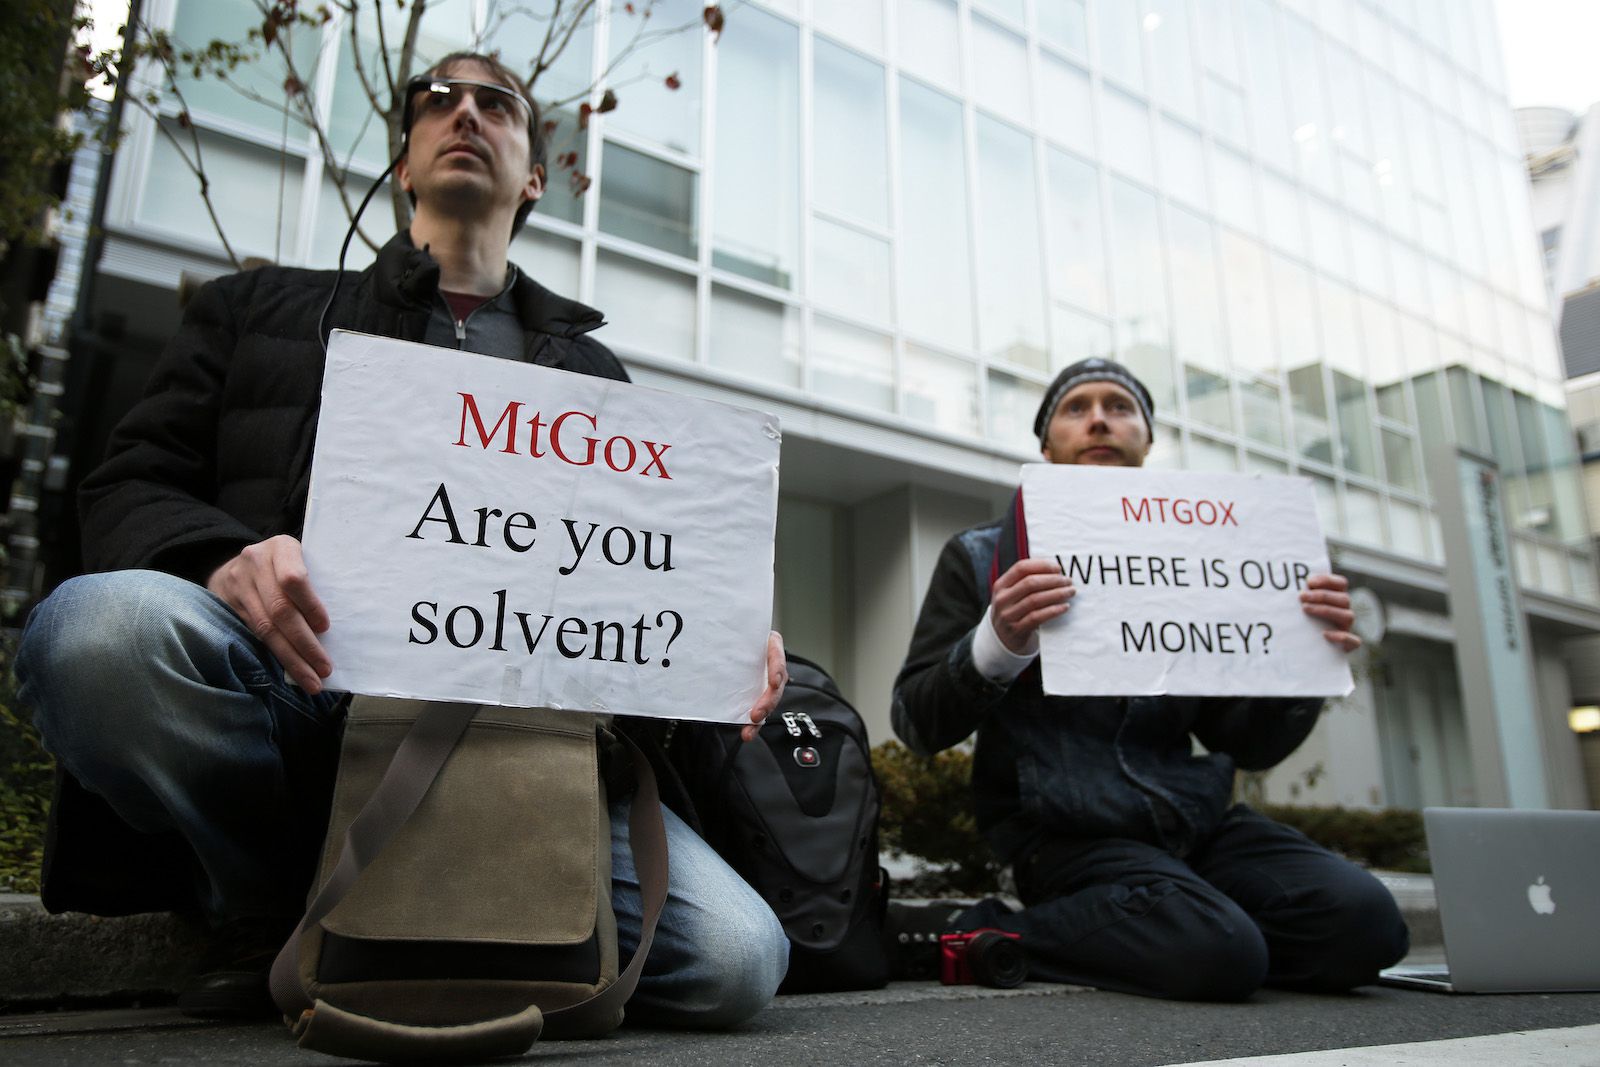 Mt.-gox-rehabilitation-plan-worth-billions-in-compensation-approved;-finalization-to-follow